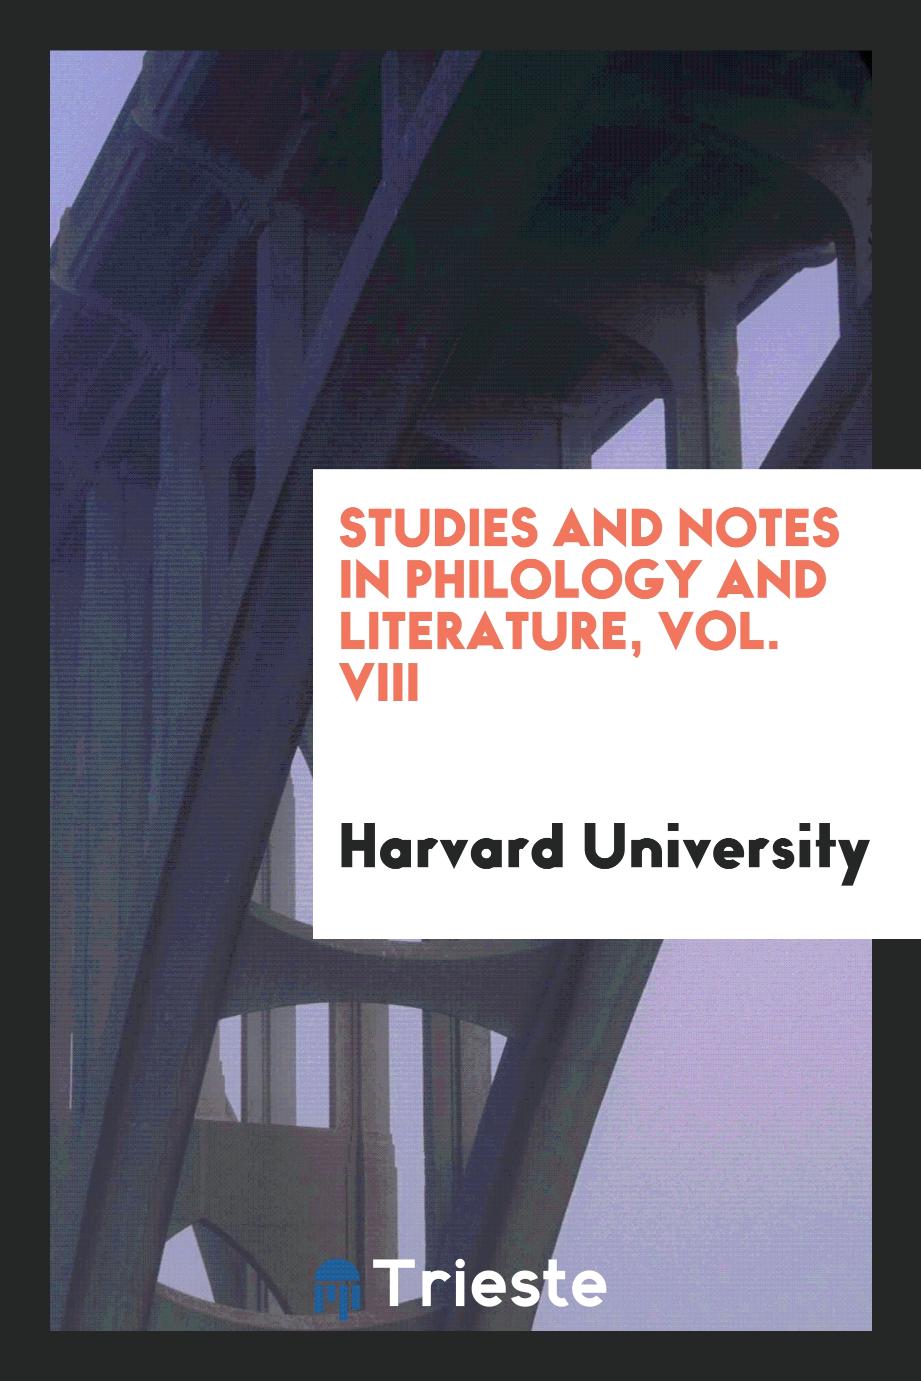 Studies and notes in philology and literature, Vol. VIII